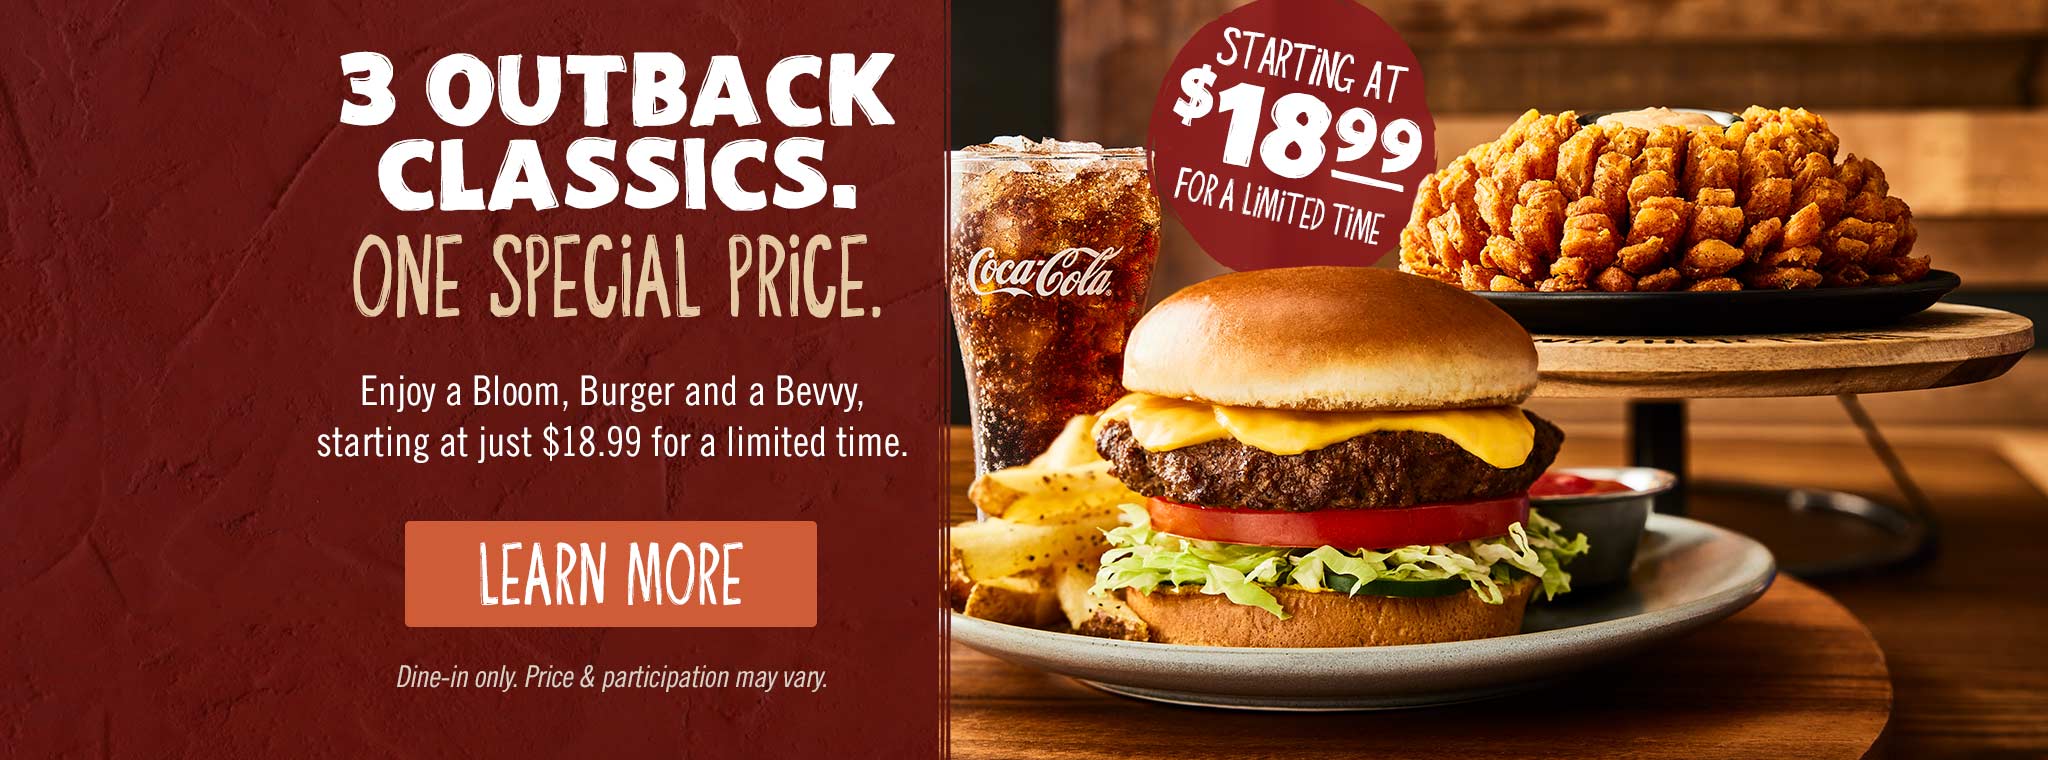 3 Classics. One Special Price. Enjoy a Bloom Burger and a Bevvy, starting at just $18.99 for a limited time. LEARN MORE. Dine-in only. Price & participation may vary.